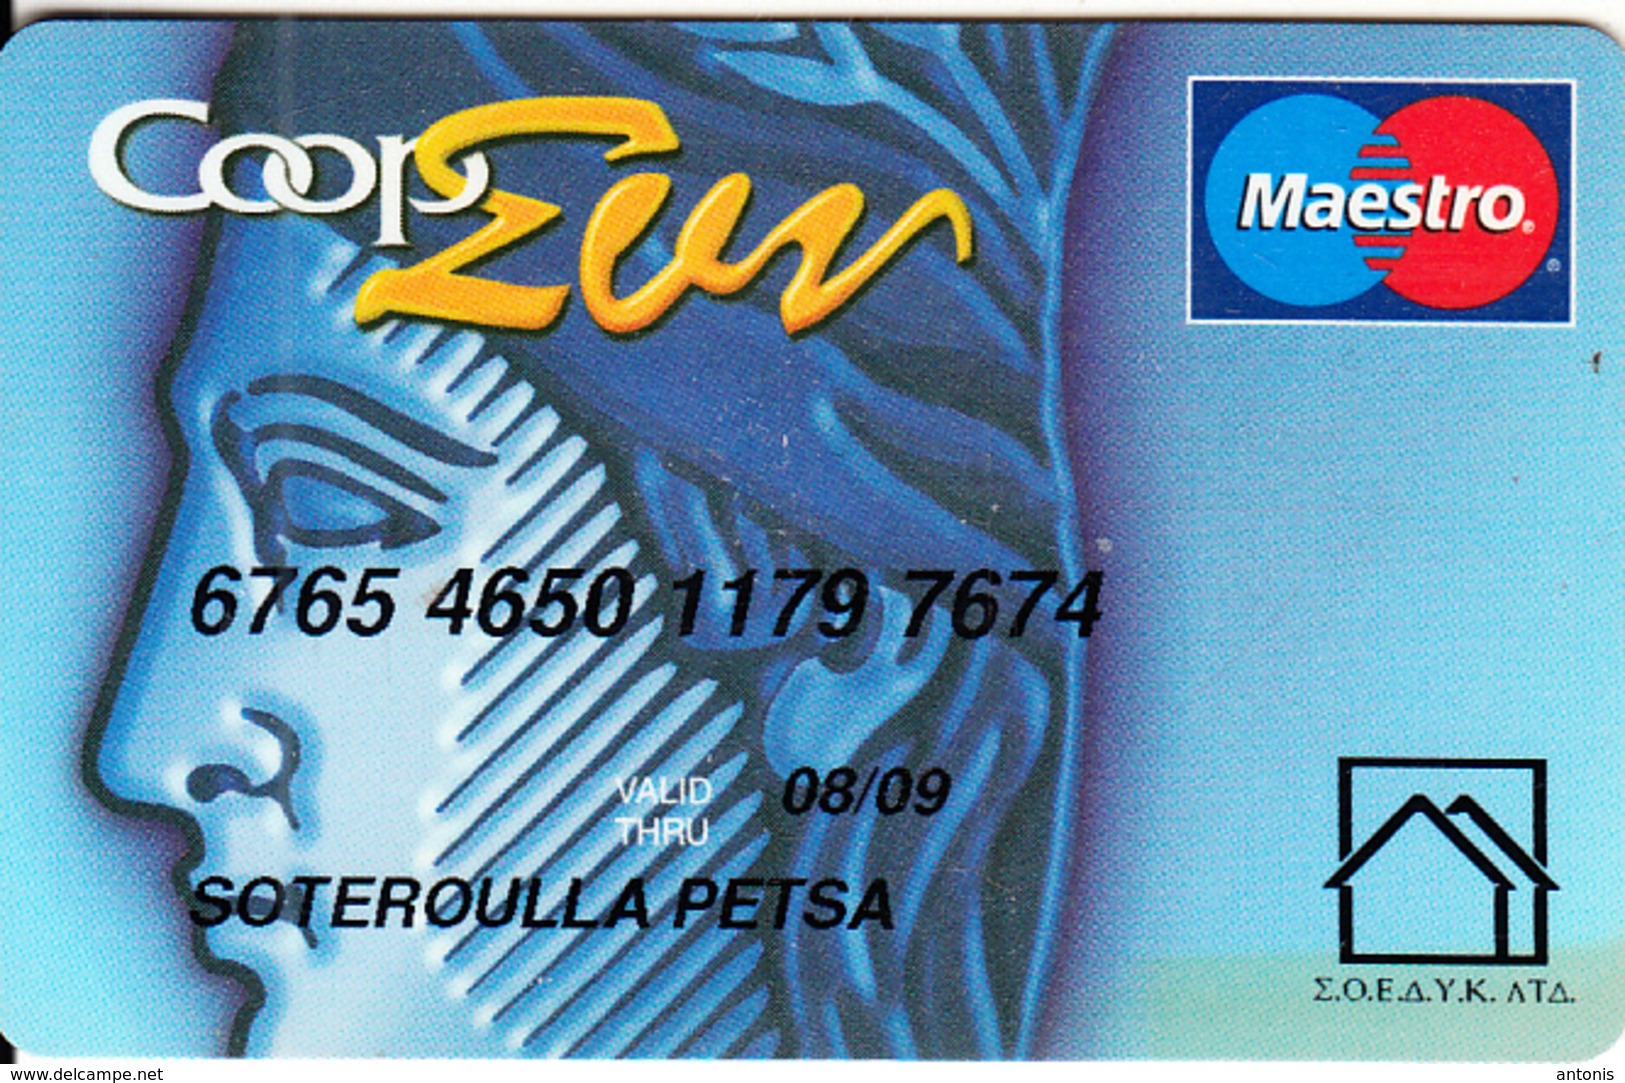 CYPRUS - Coop Central Bank Maestro Card(reverse VCT), 11/05, Used - Credit Cards (Exp. Date Min. 10 Years)